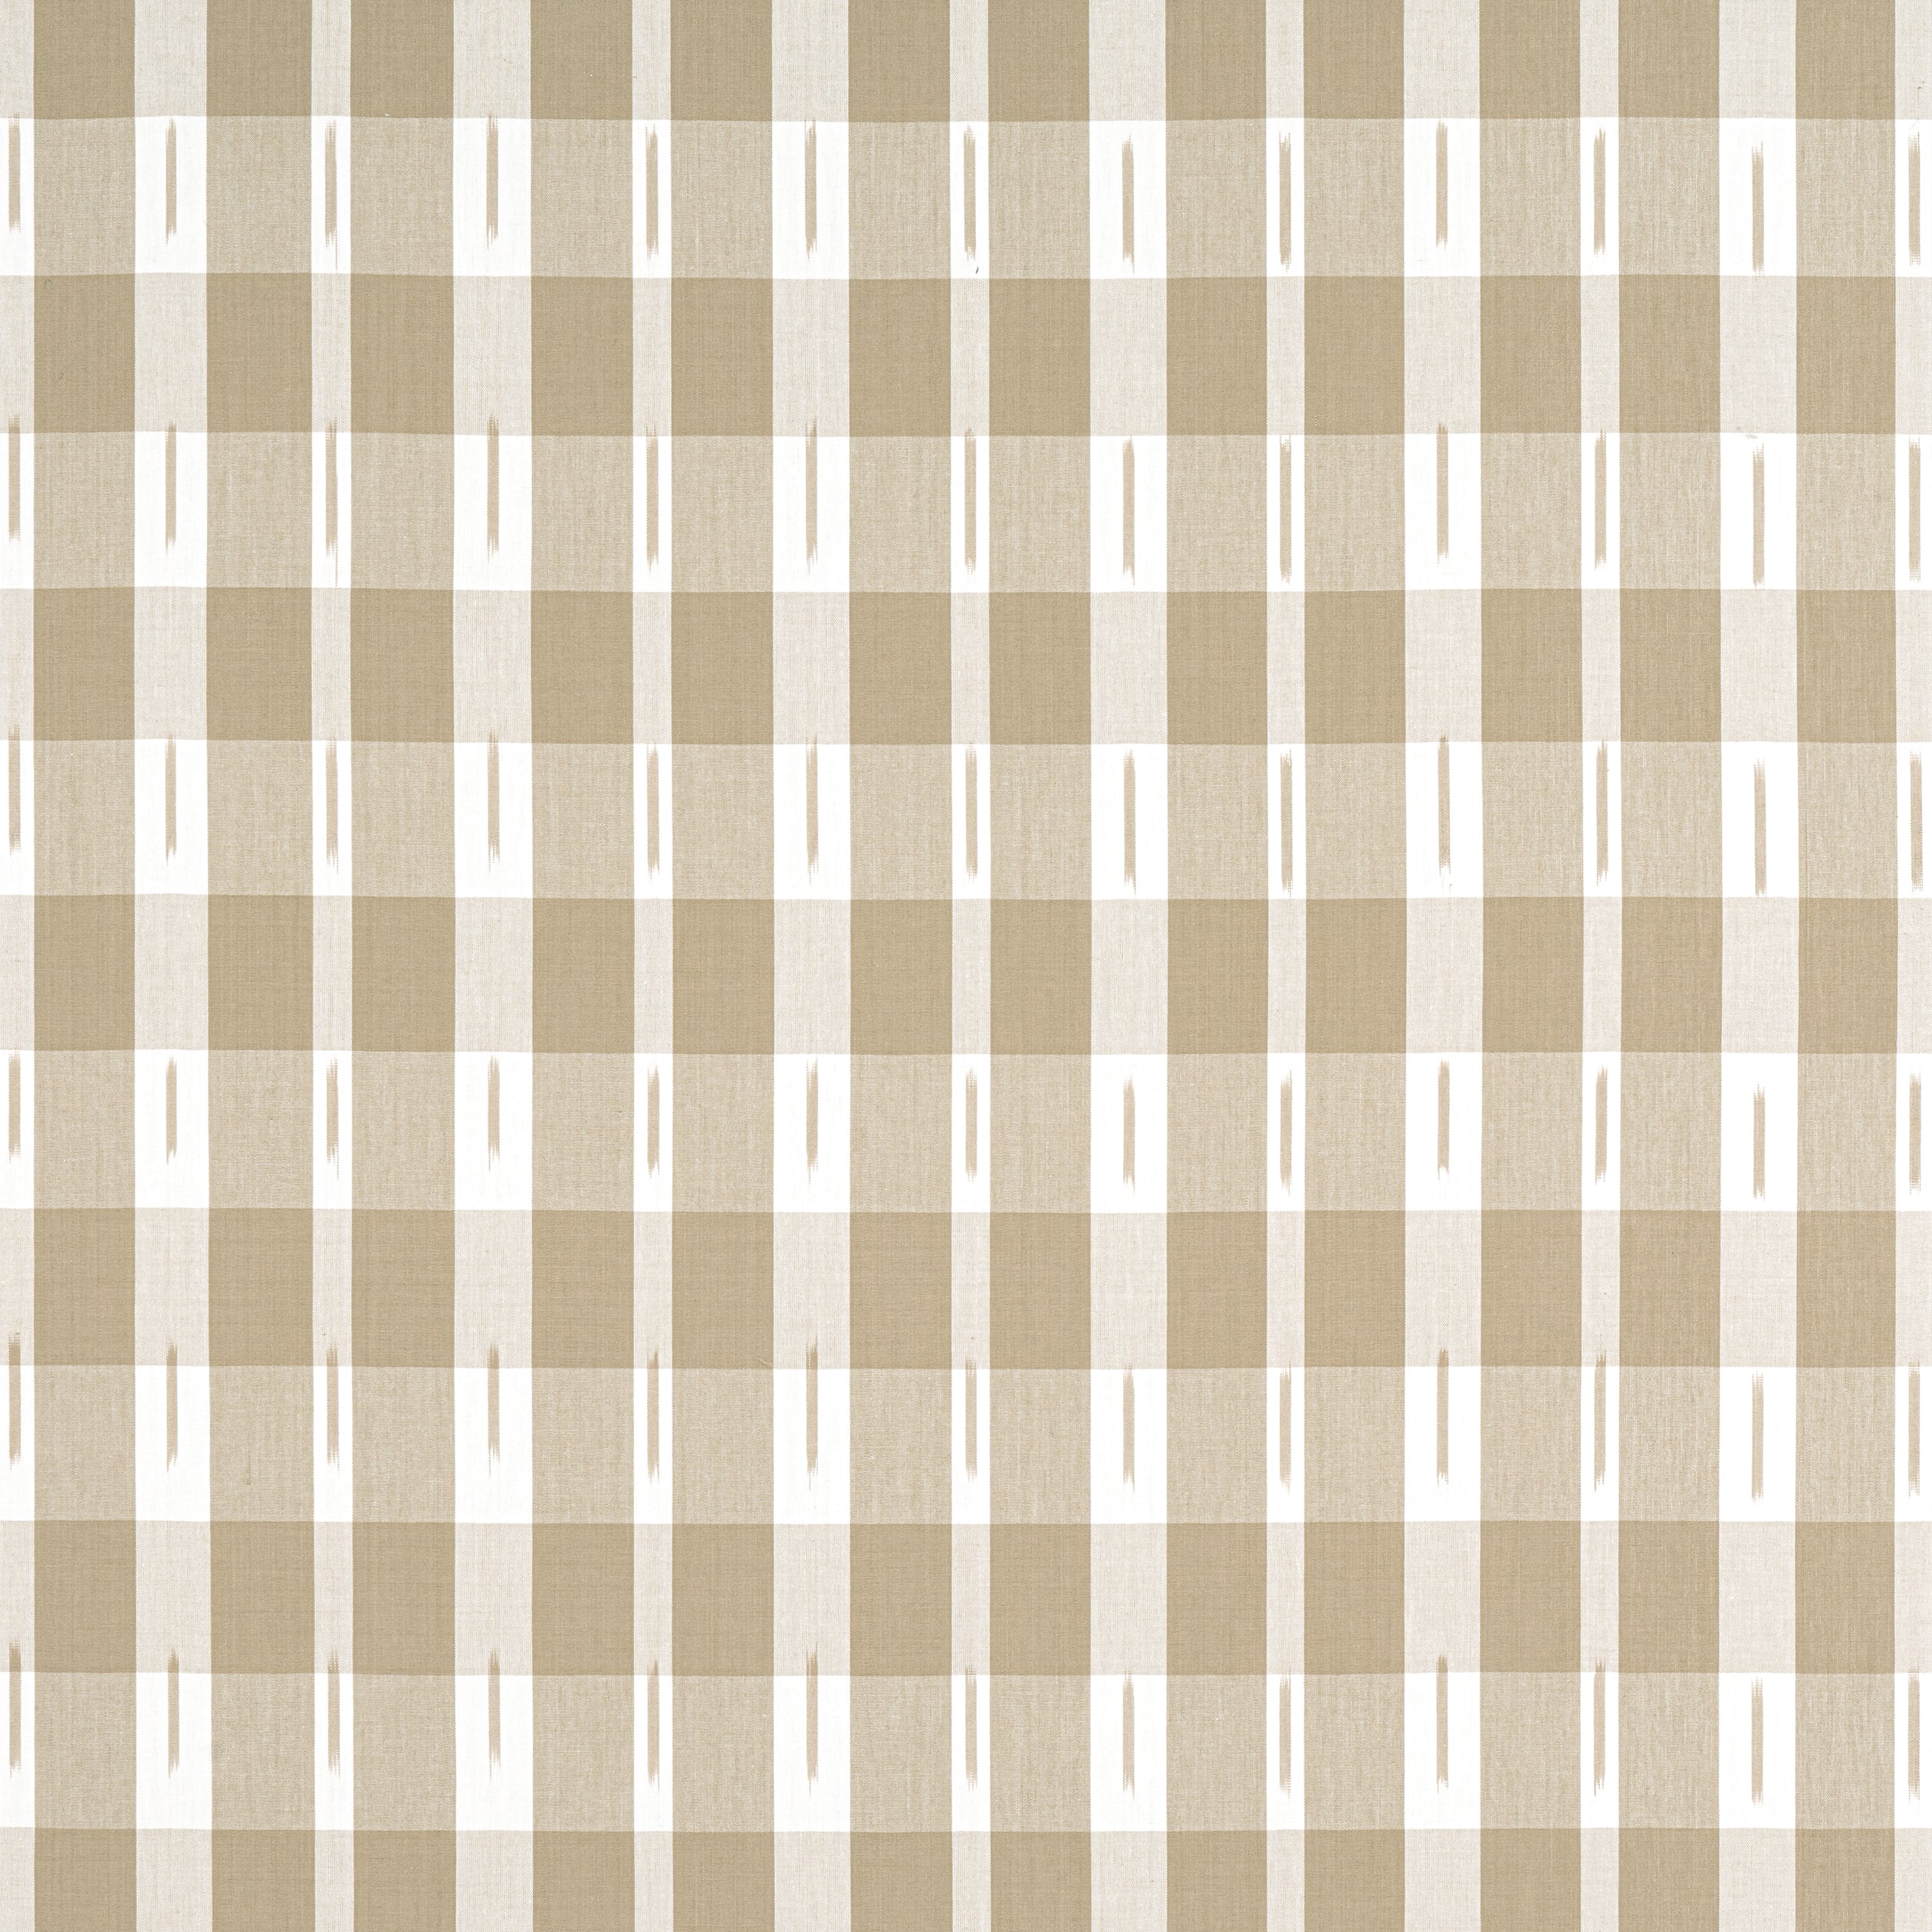 Ellastone Check fabric in beige color - pattern number W736441 - by Thibaut in the Indienne collection